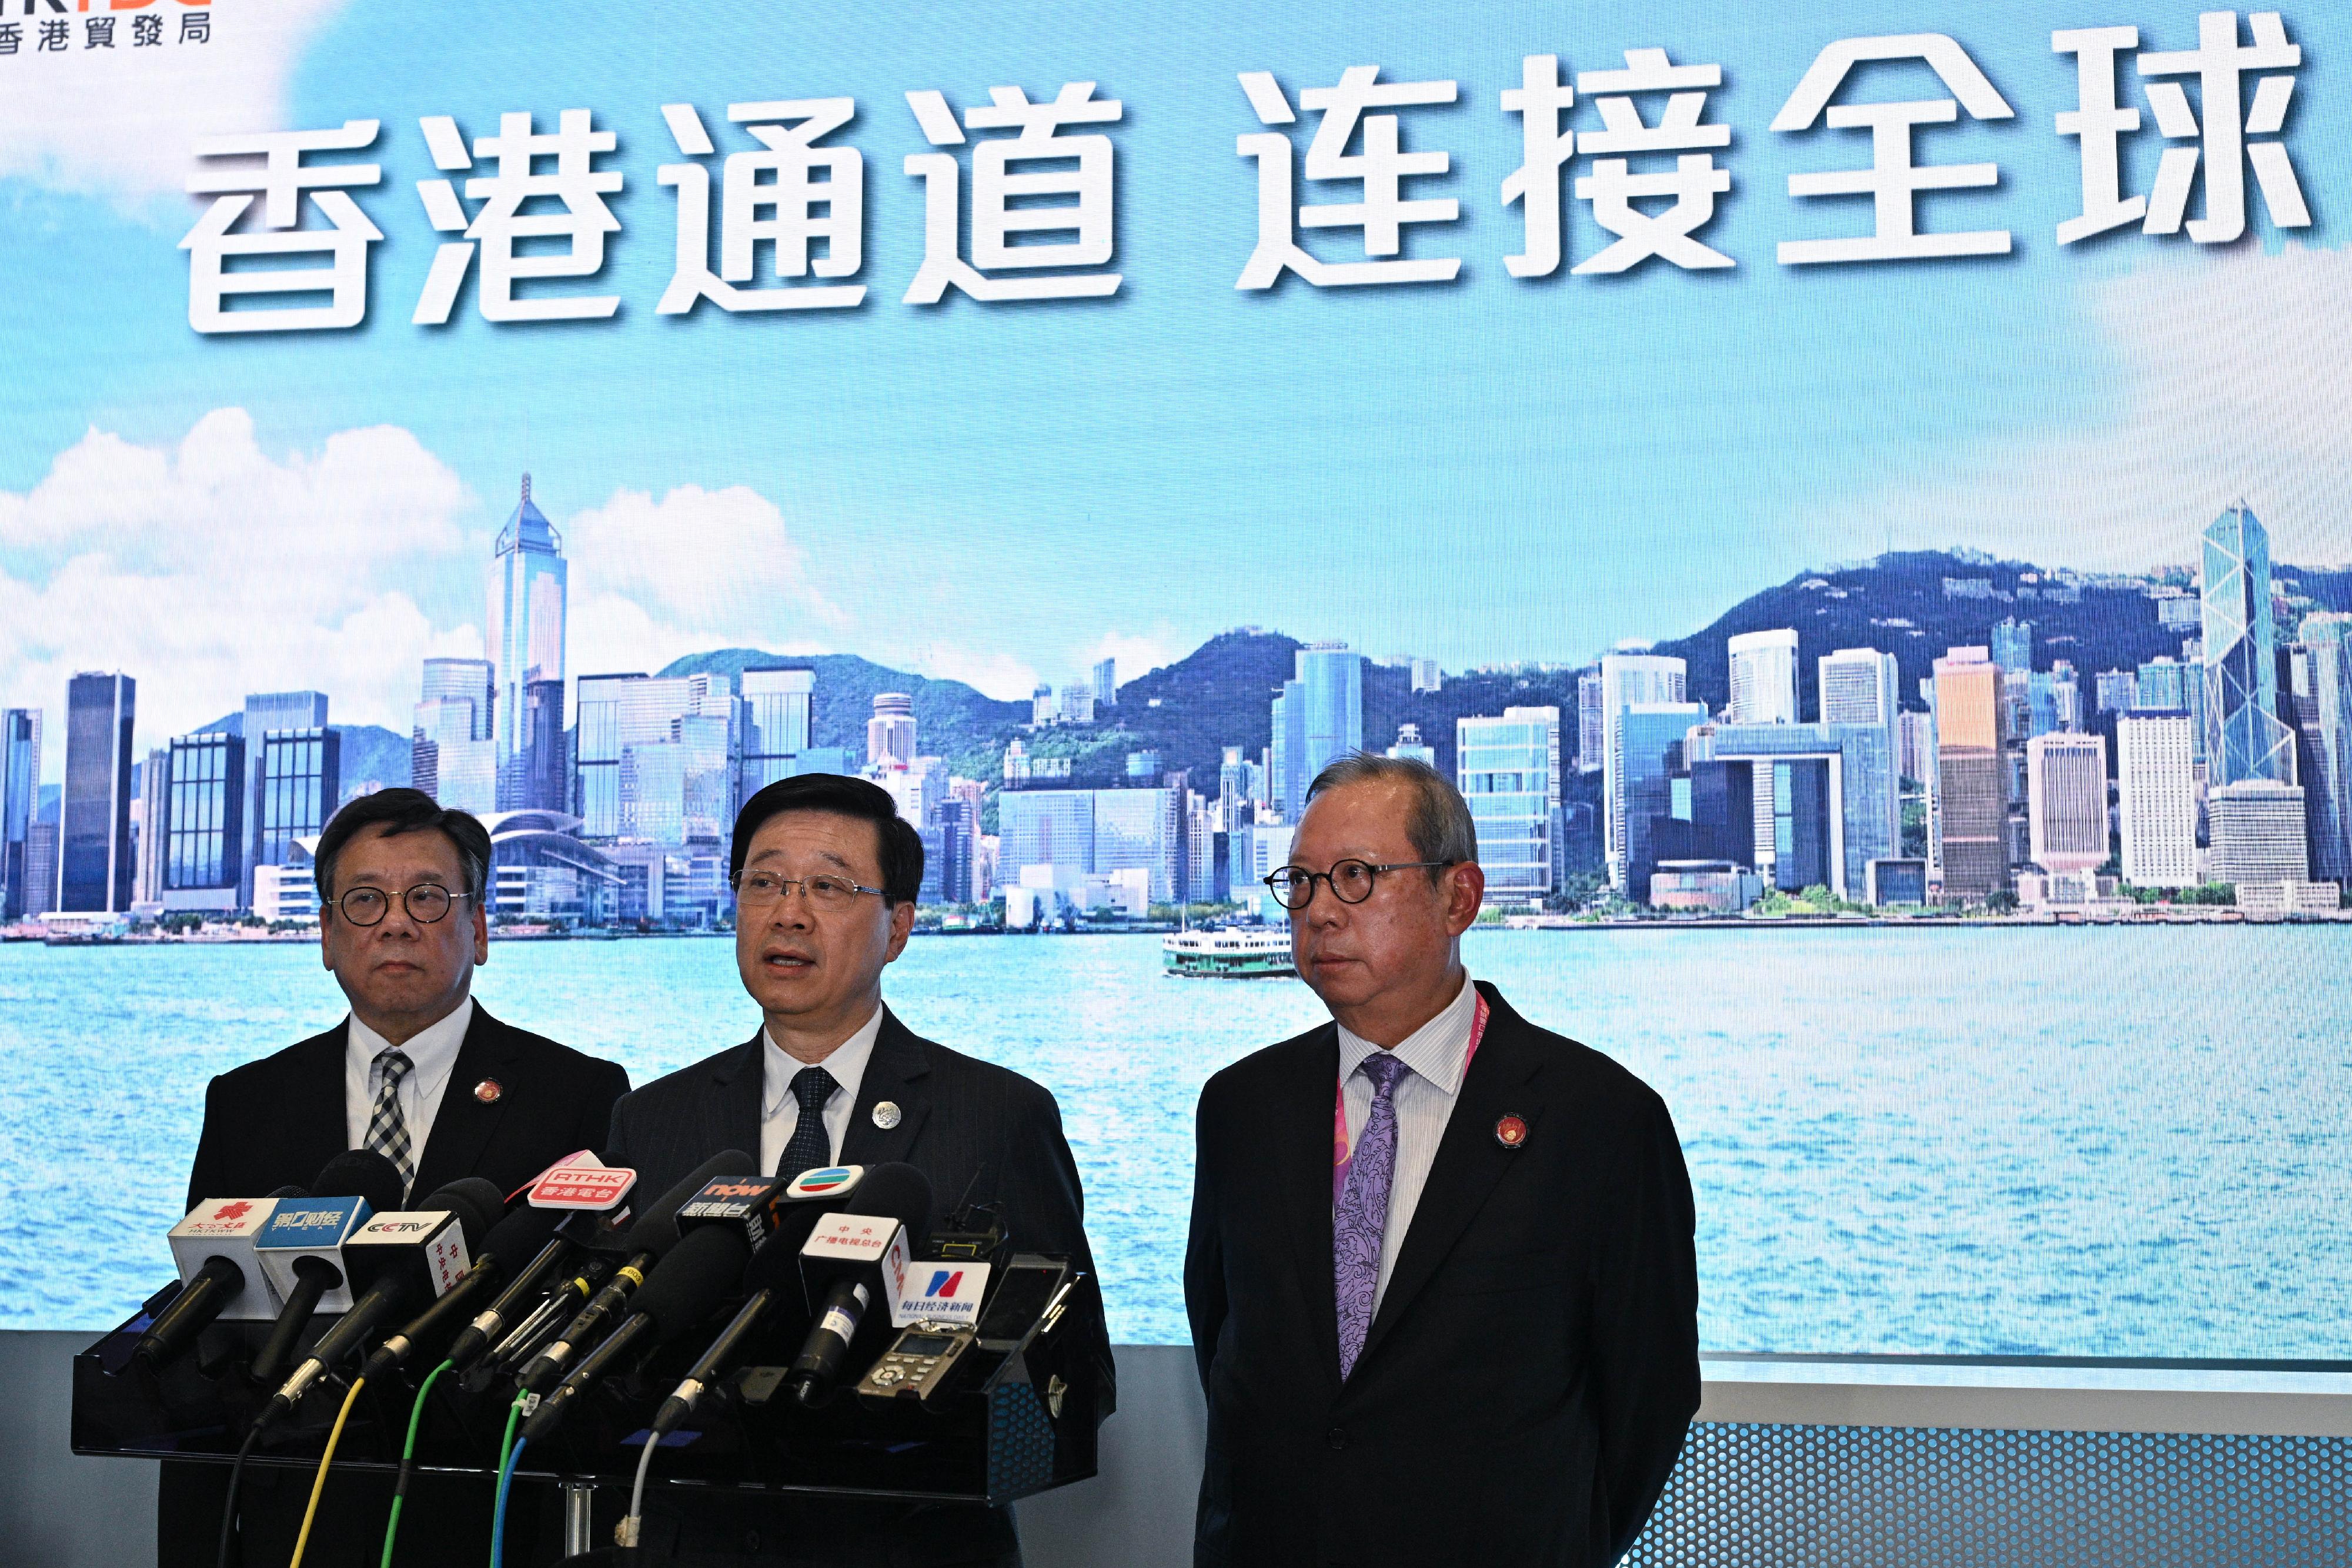 The Chief Executive, Mr John Lee (centre), with the Secretary for Commerce and Economic Development, Mr Algernon Yau (left), and the Chairman of the Hong Kong Trade Development Council, Dr Peter Lam (right), meet the media in Shanghai to conclude the visit today (November 5).